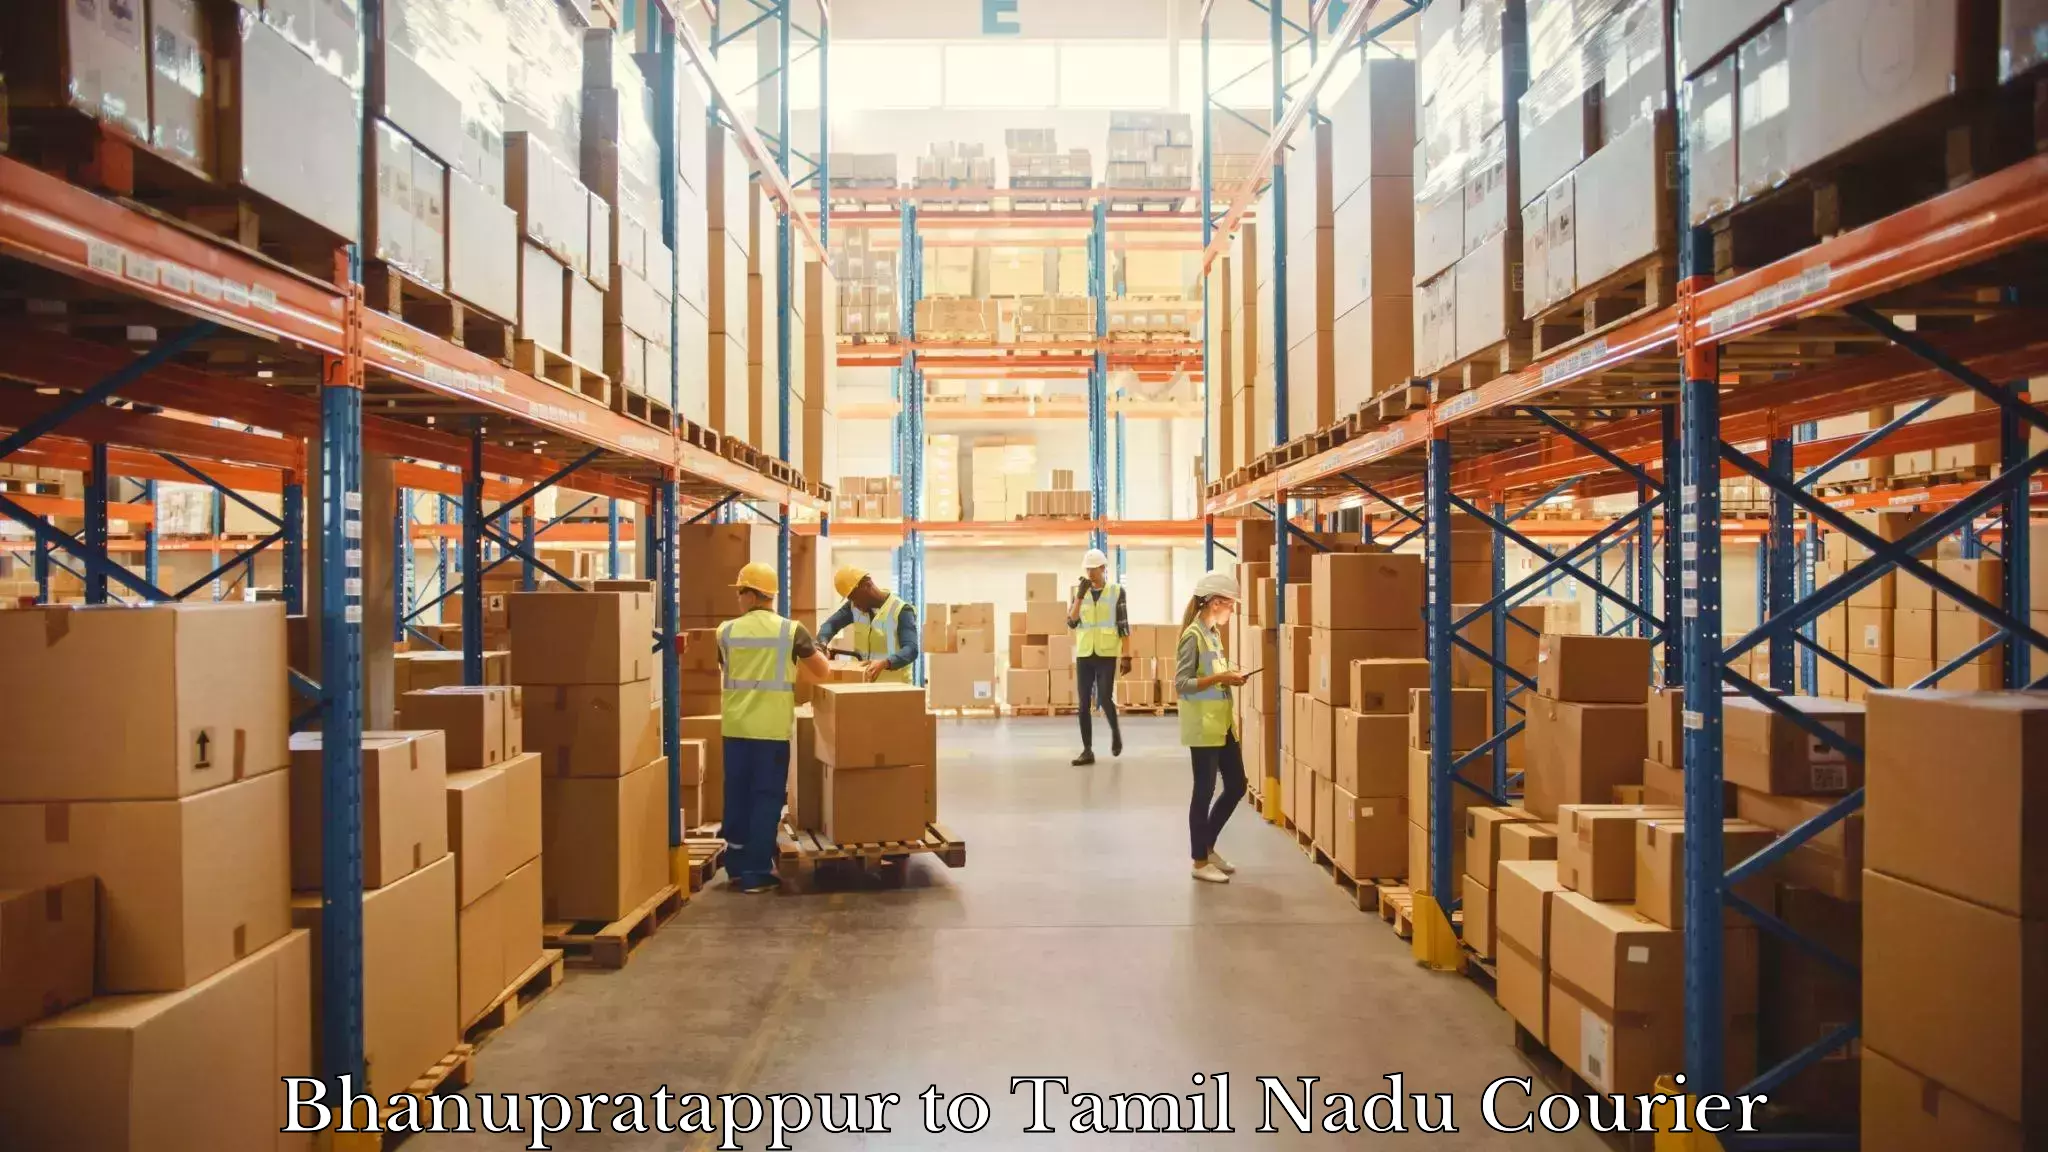 Holiday shipping services Bhanupratappur to Pollachi